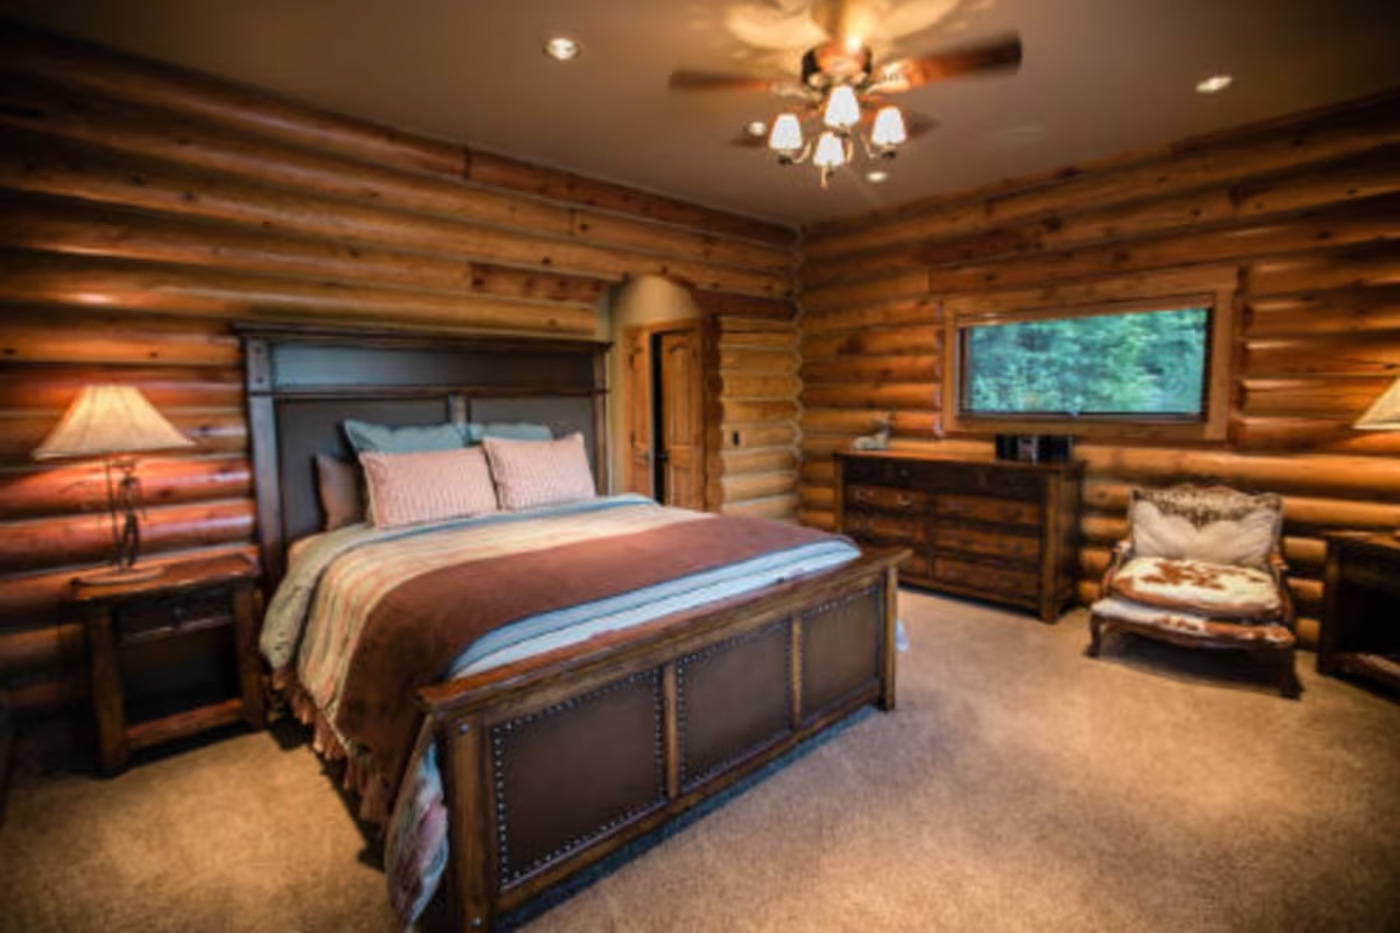 A clean and tidy double room with a log finish to the walls inside Lux Lodge.